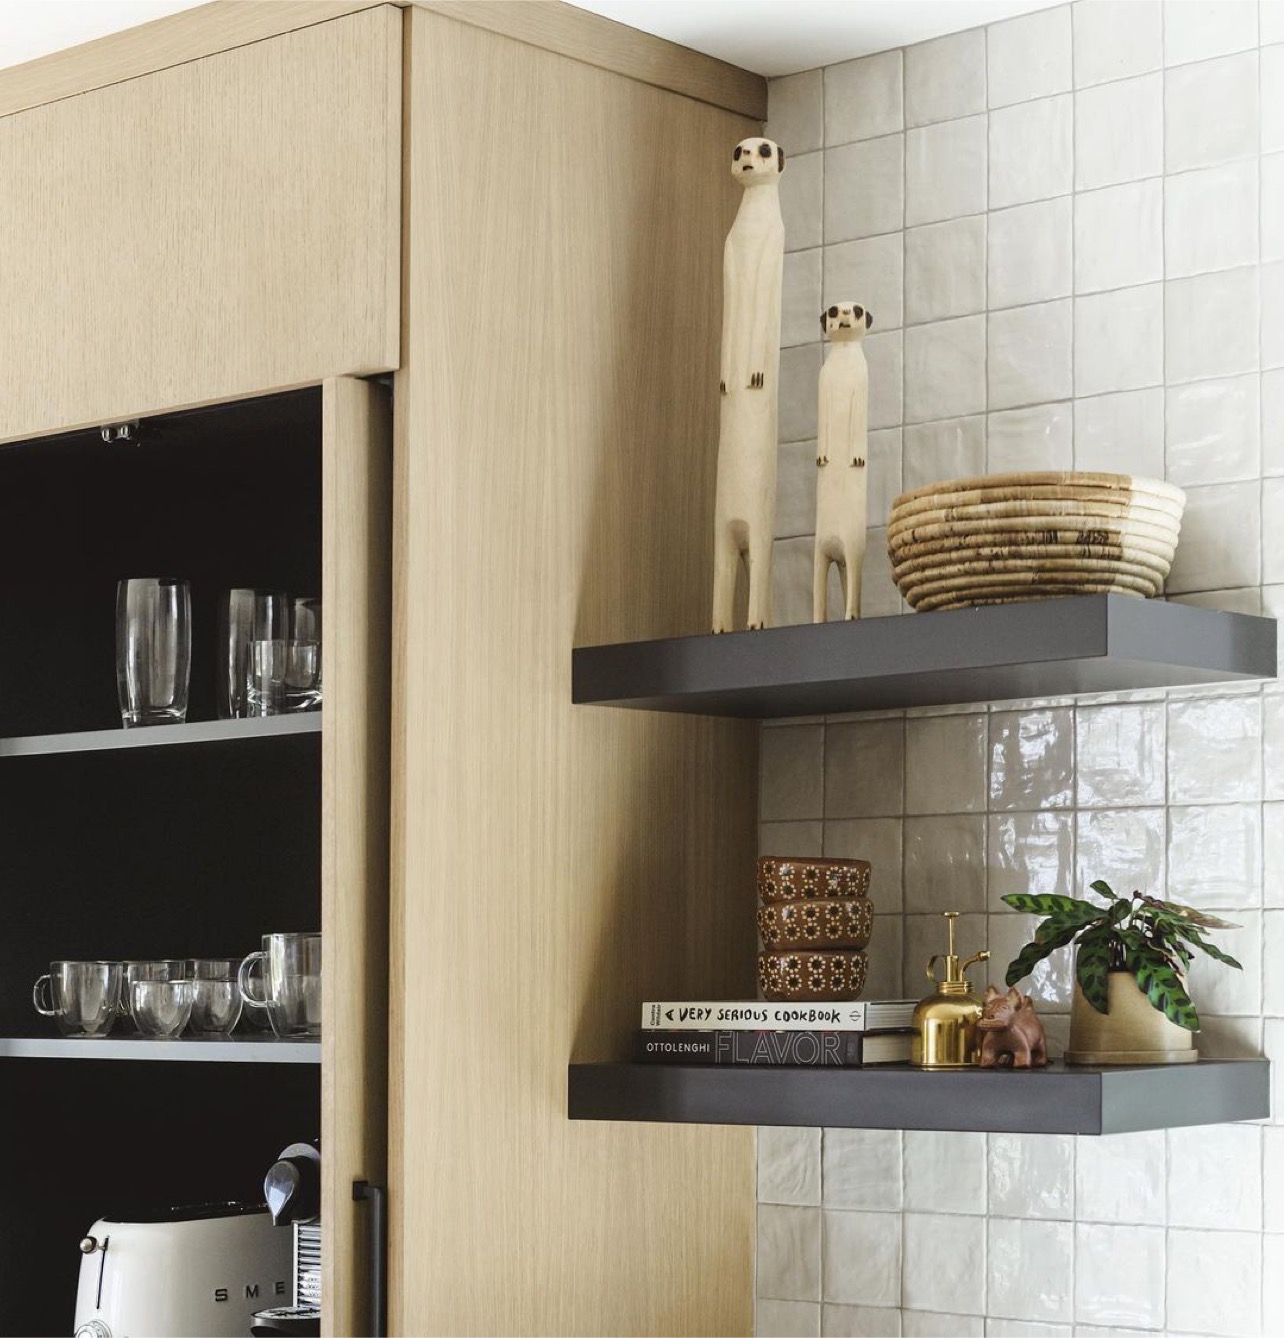 Open kitchen shelving and handmade ceramic wall tile